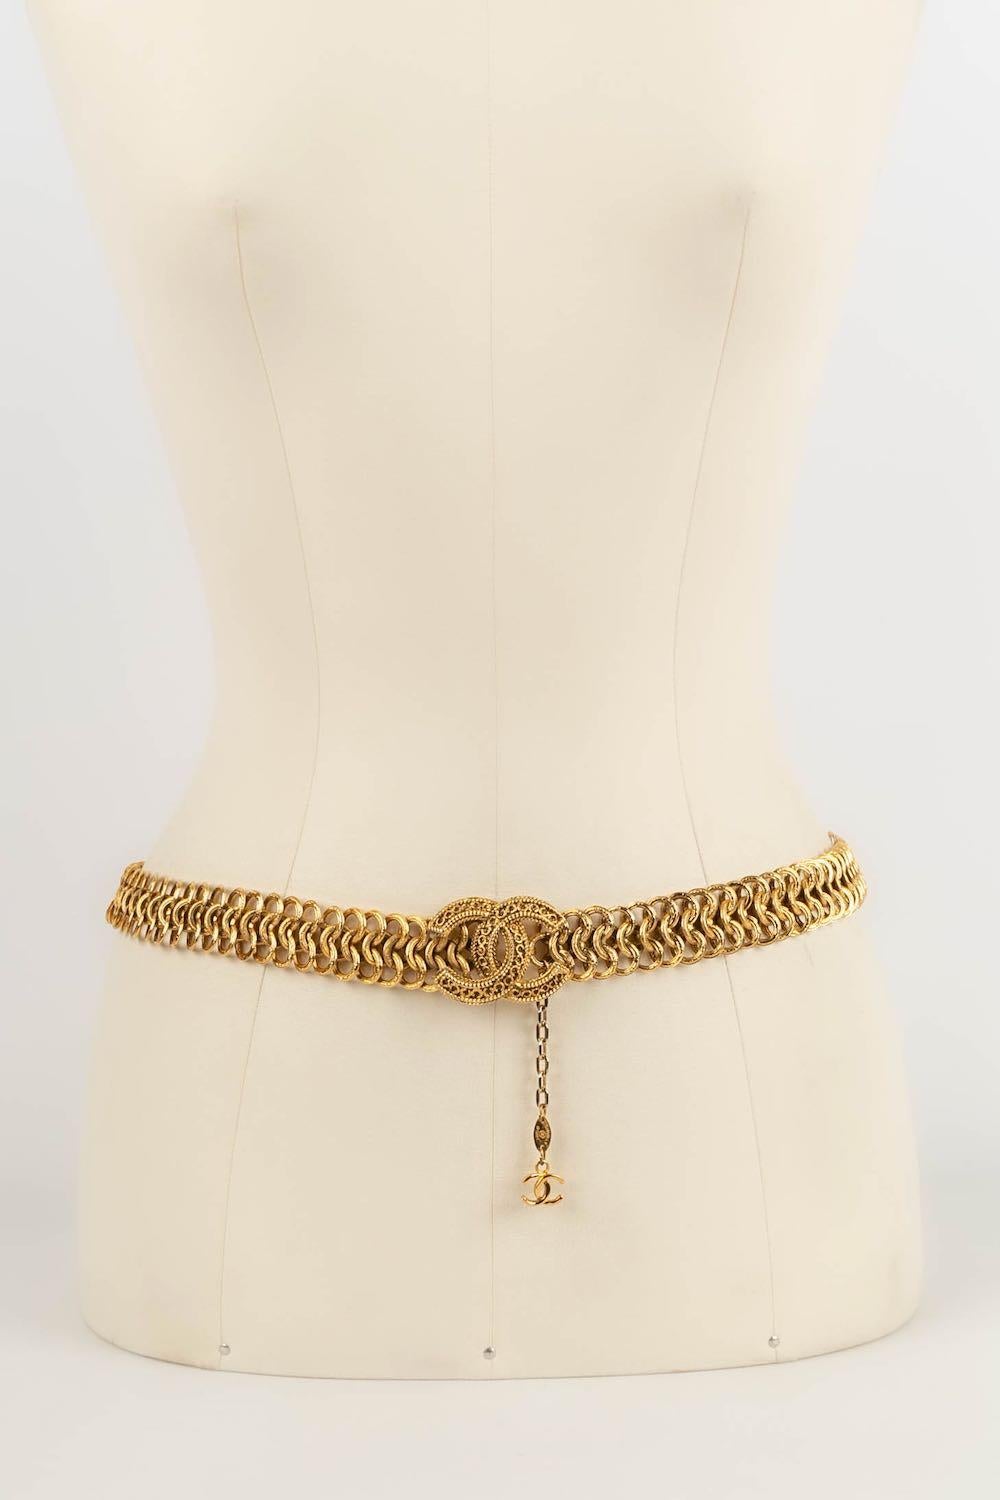 Chanel Belt in Gold Metal and CC Buckle, 1985 4